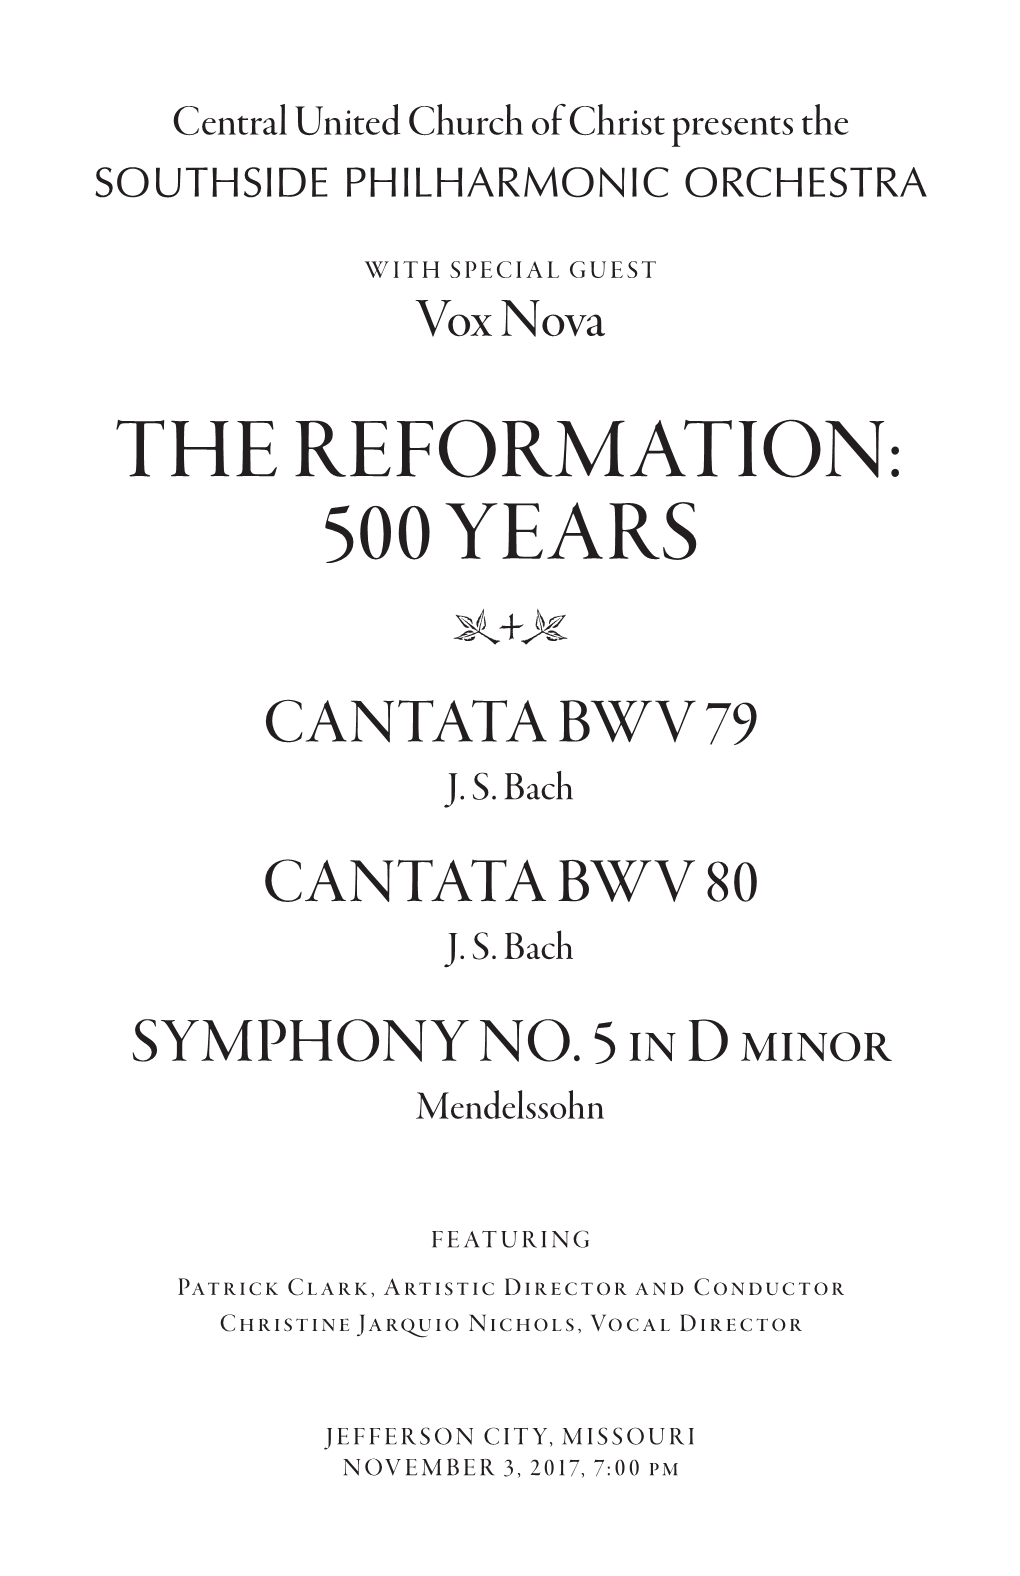 The Reformation: 500 Years © Cantata Bwv 79 J